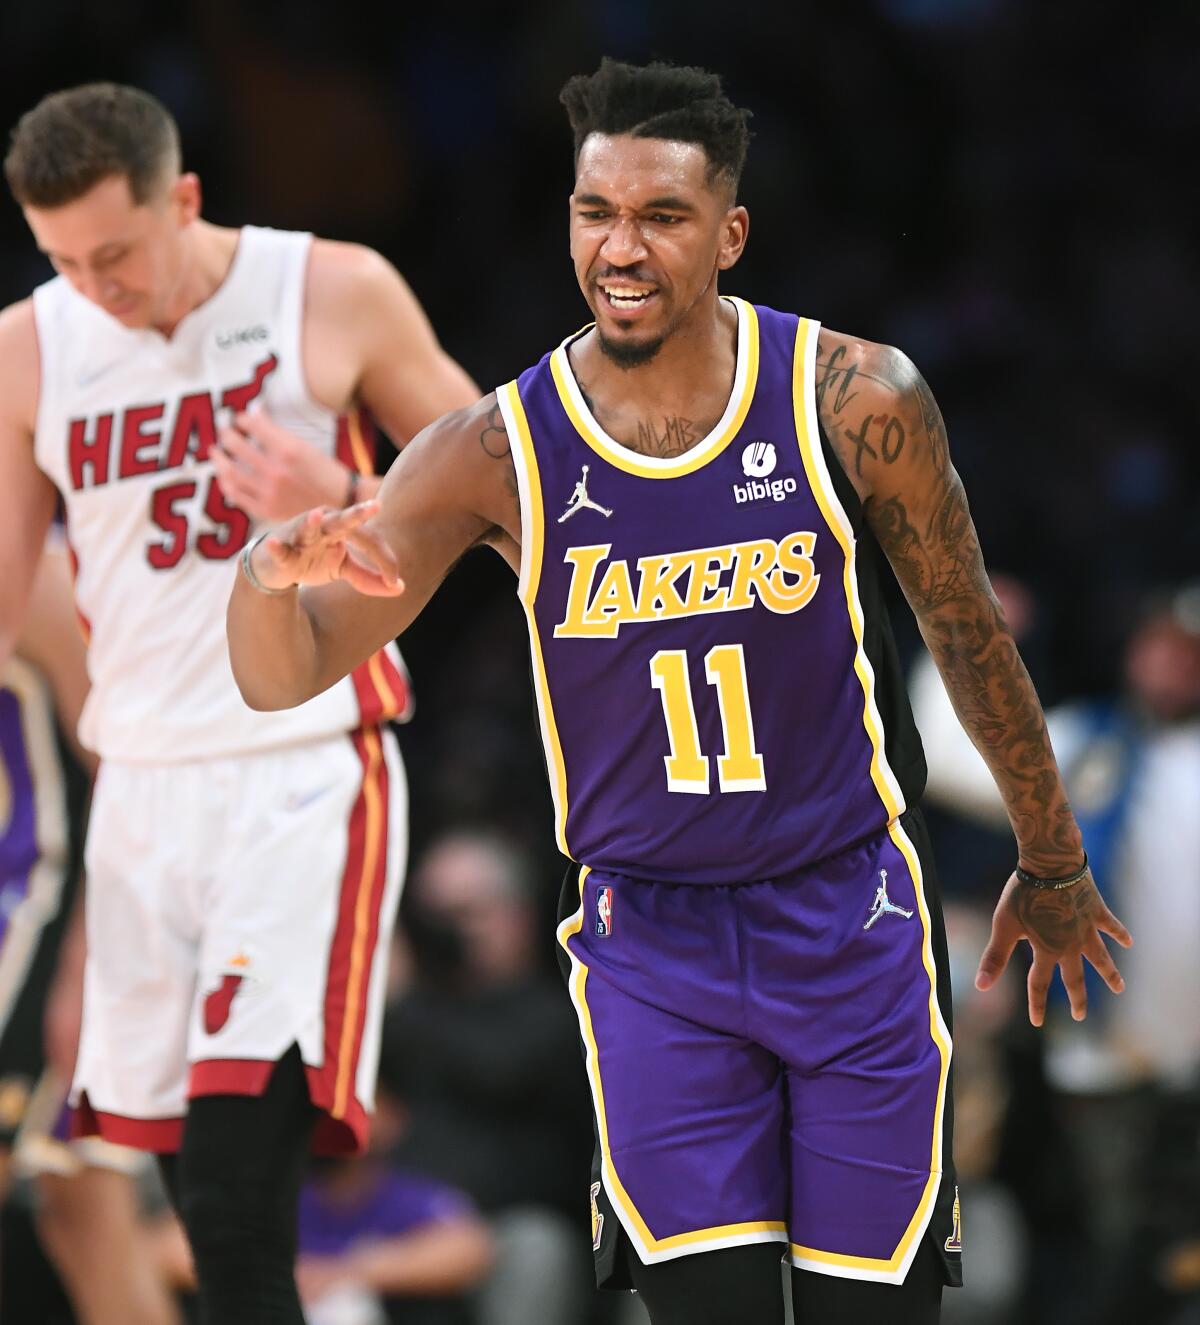 Lakers guard Malik Monk celebrates after making a three-pointer against the Heat.